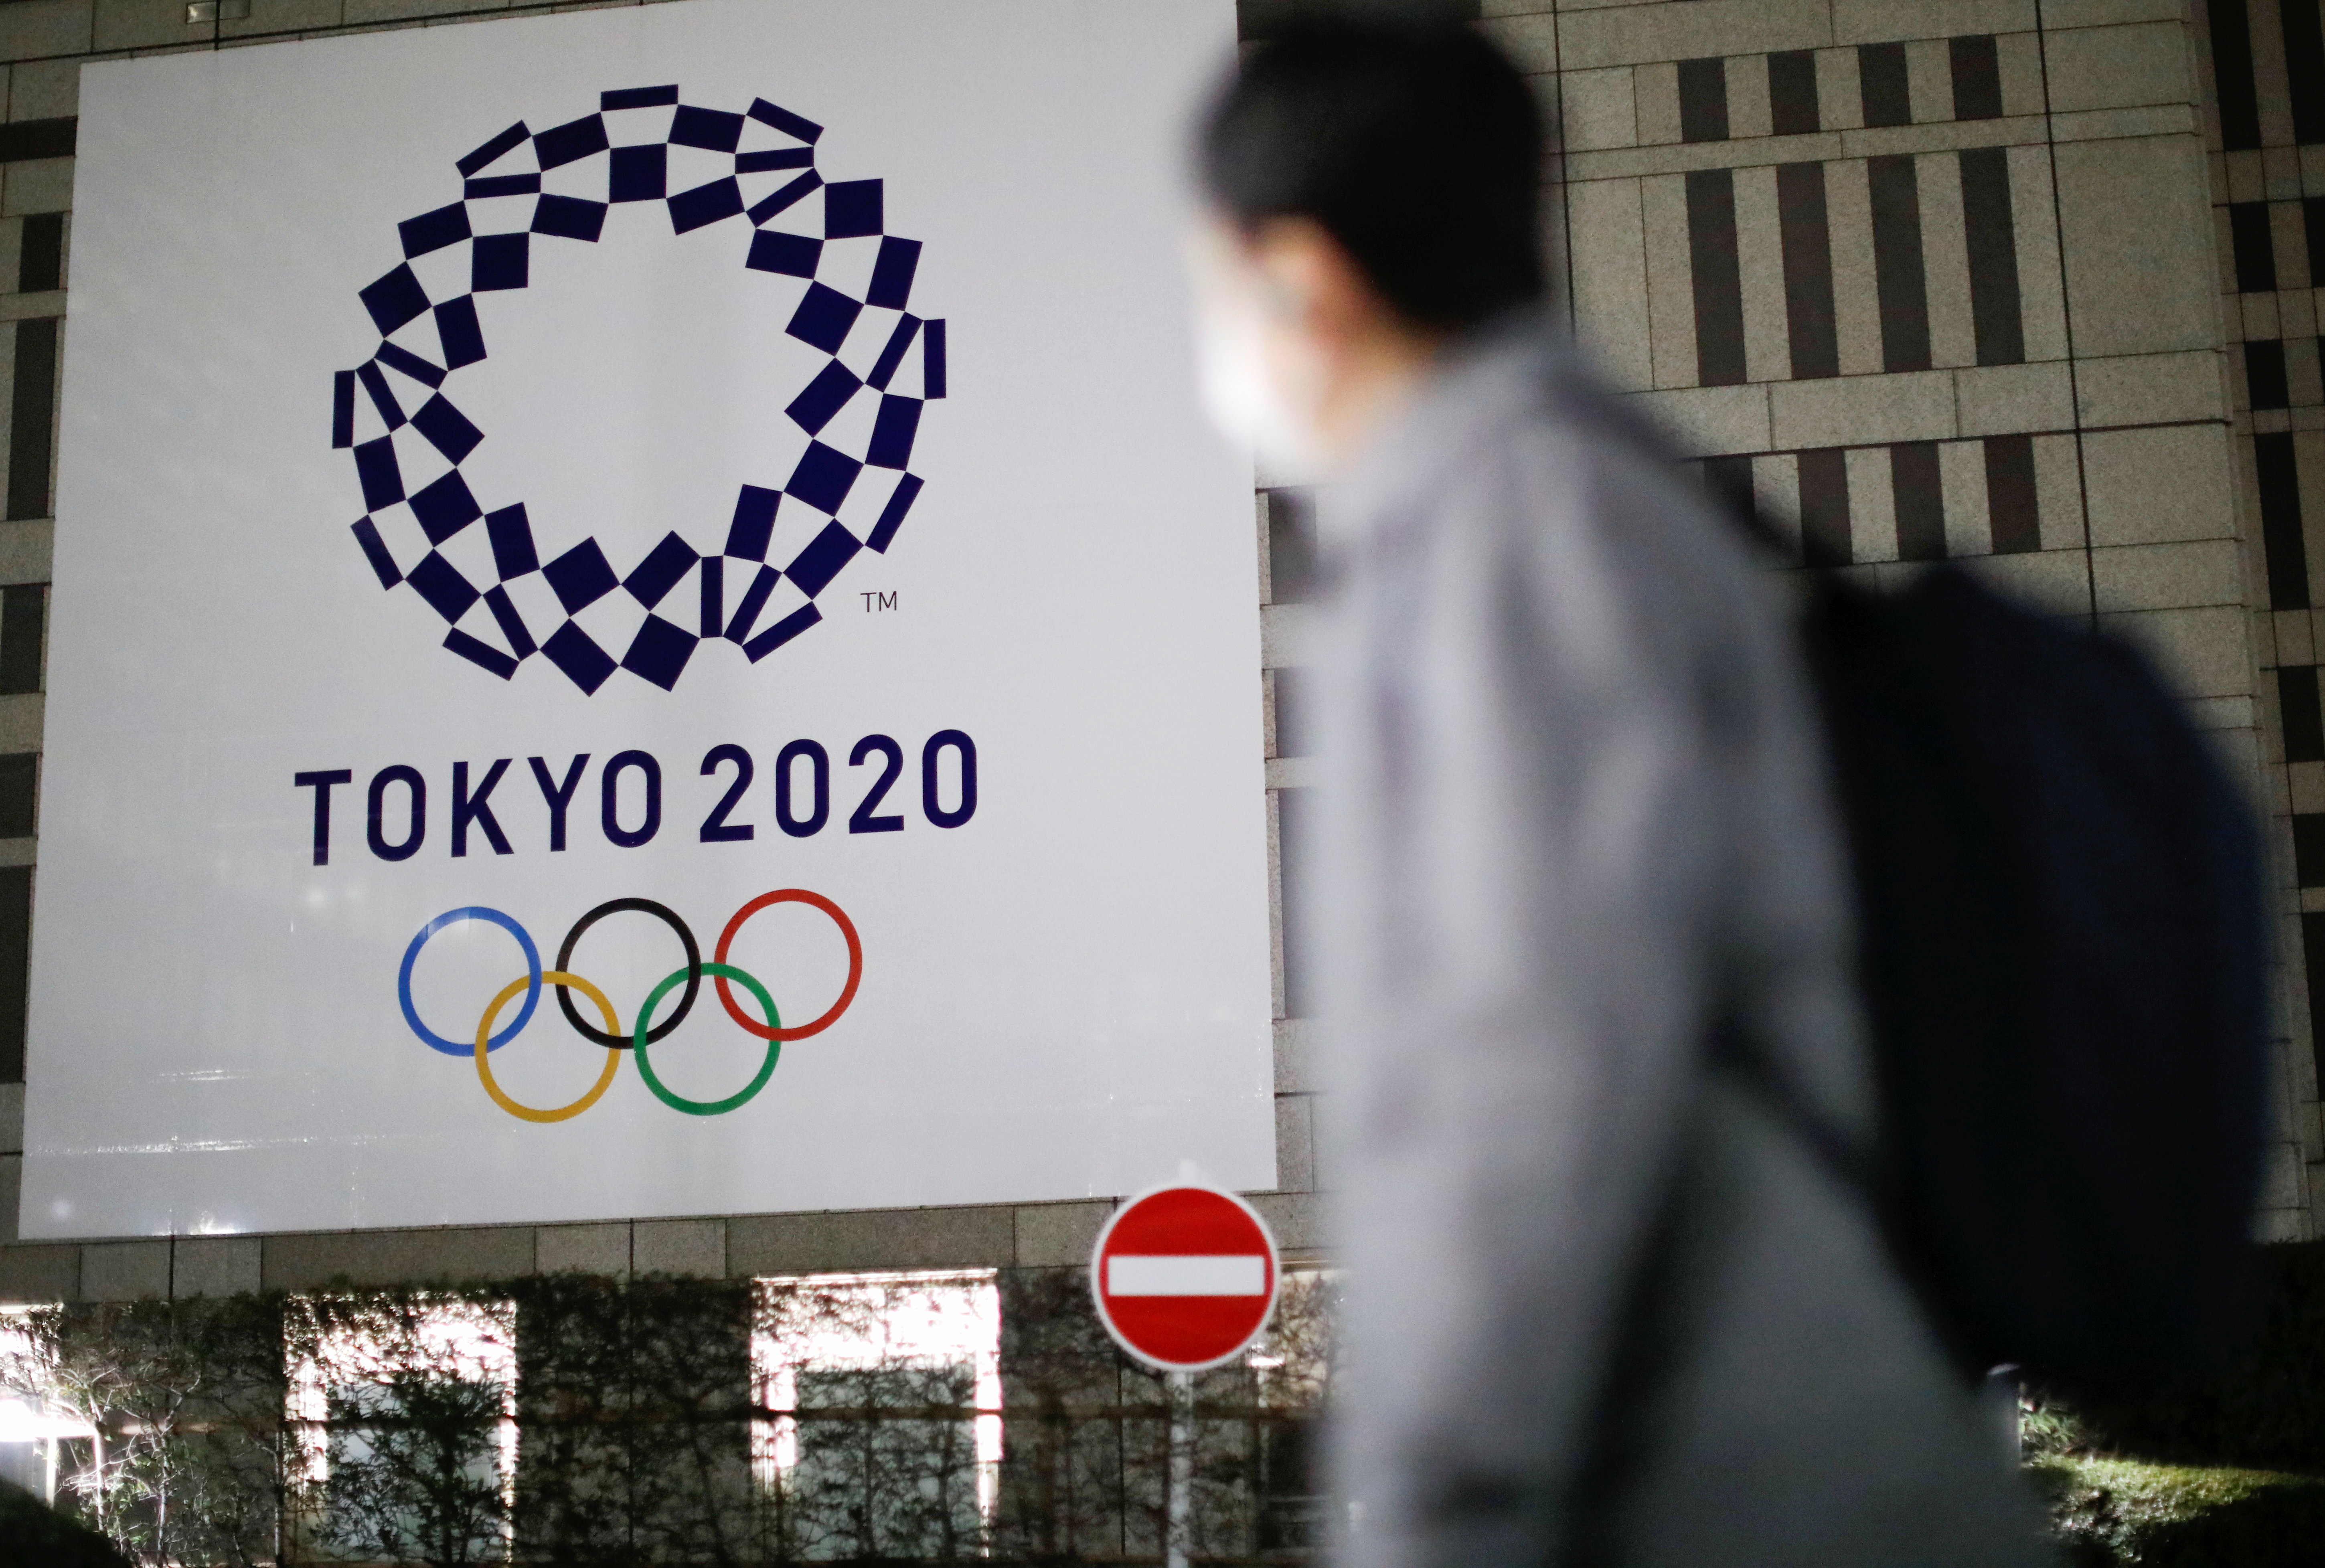 The logo of Tokyo 2020 Olympic Games is seen through signboards, in Tokyo